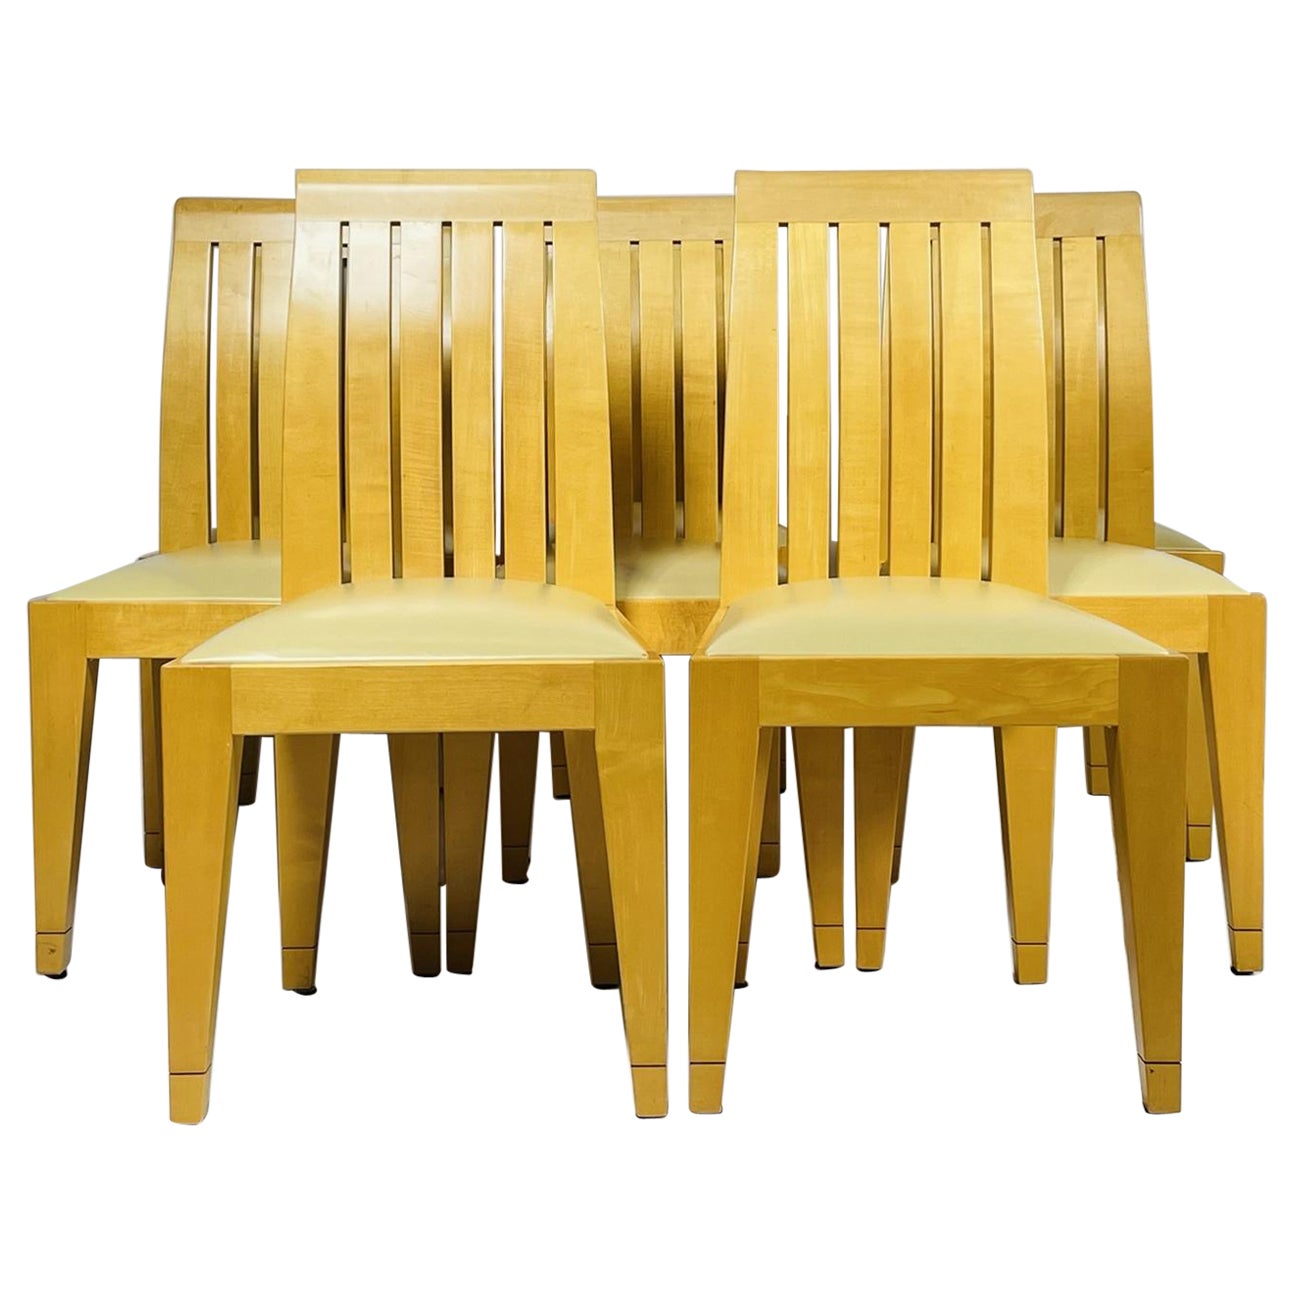 Set of 8 Dining Chairs in Blonde Wood and Leather Upholstery.